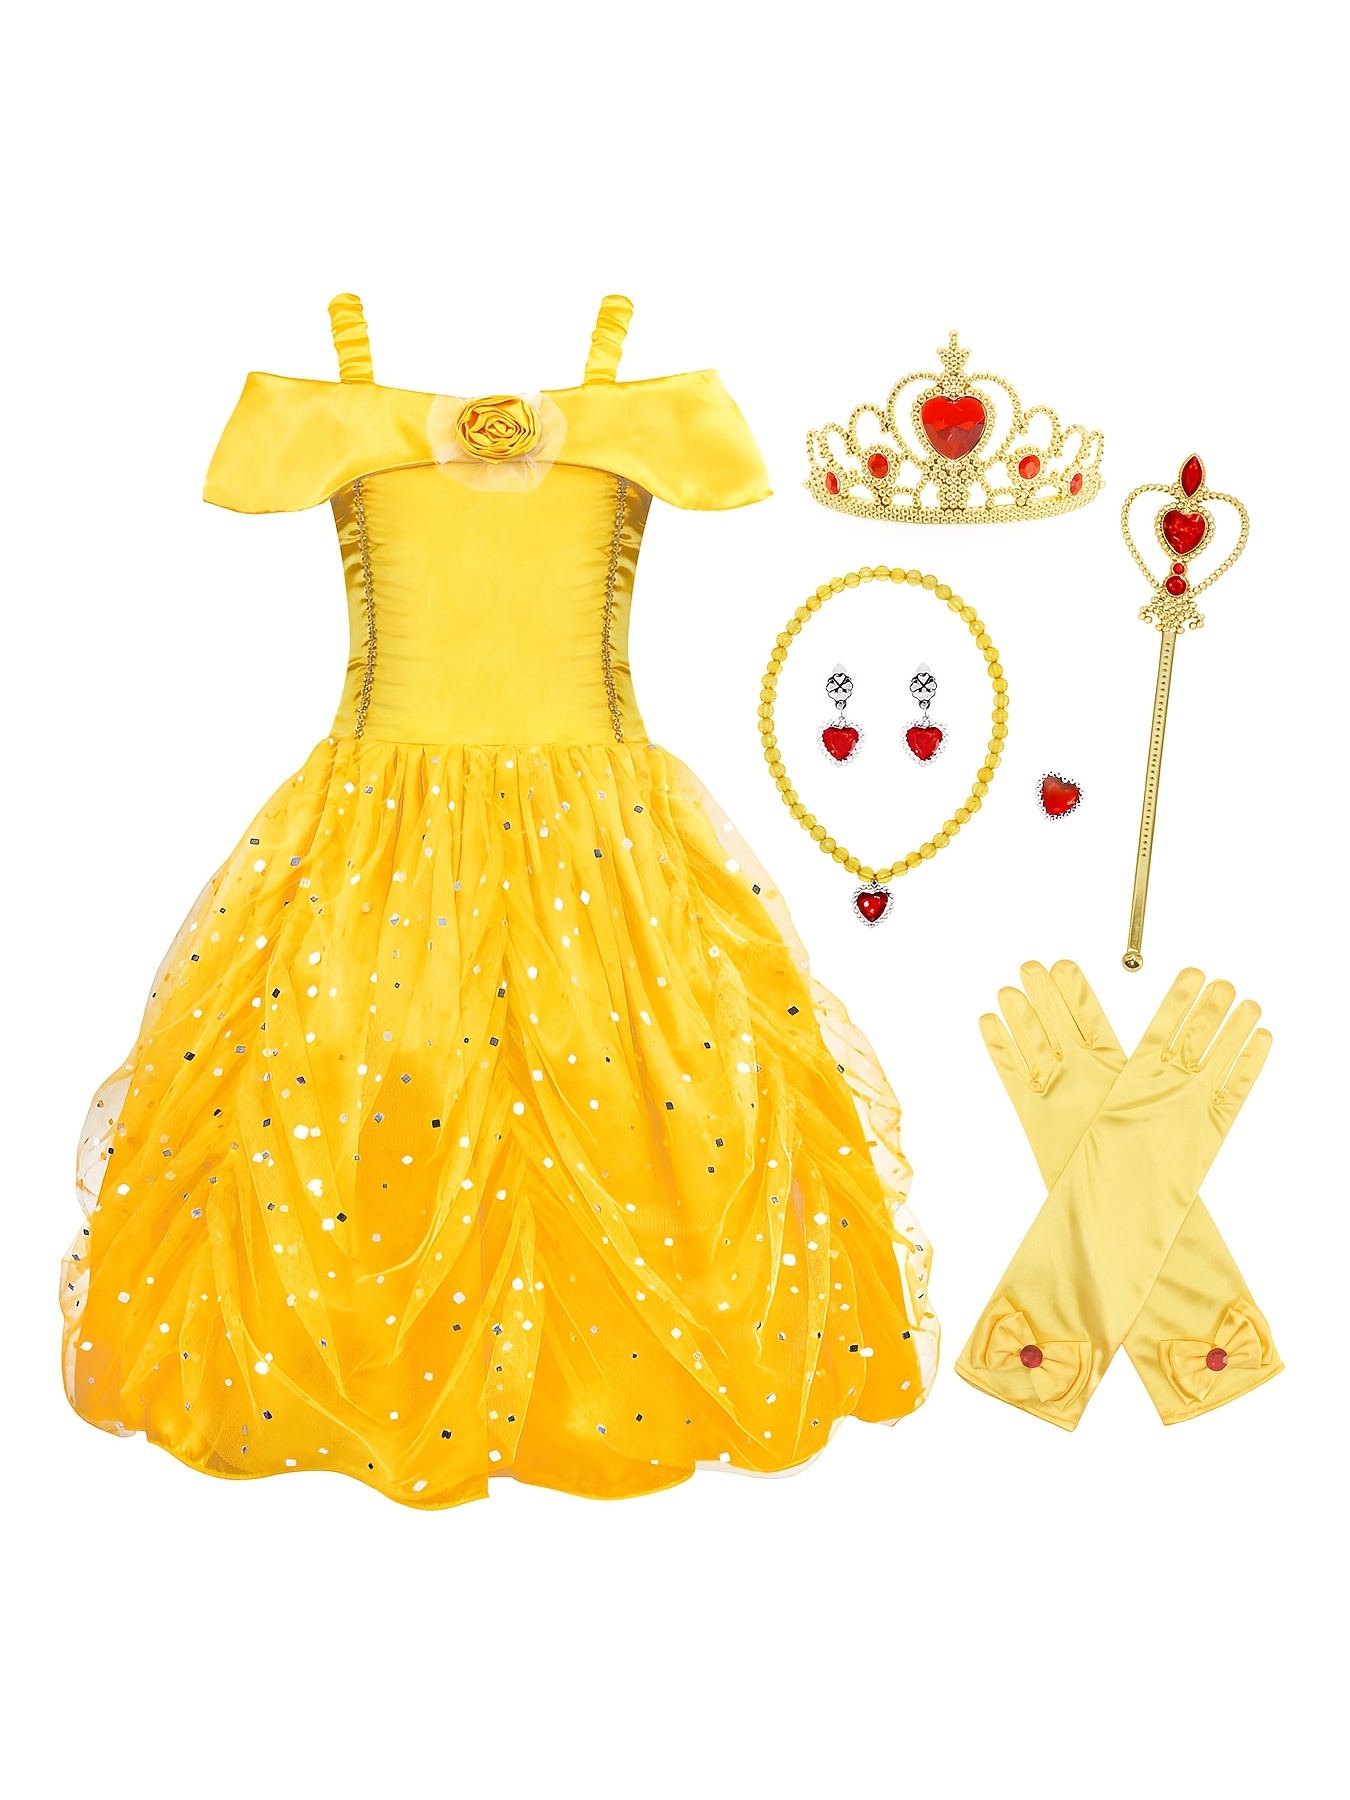 Girls Fancy Princess Costume Deluxe Dress Up Cosplay Party Dresses